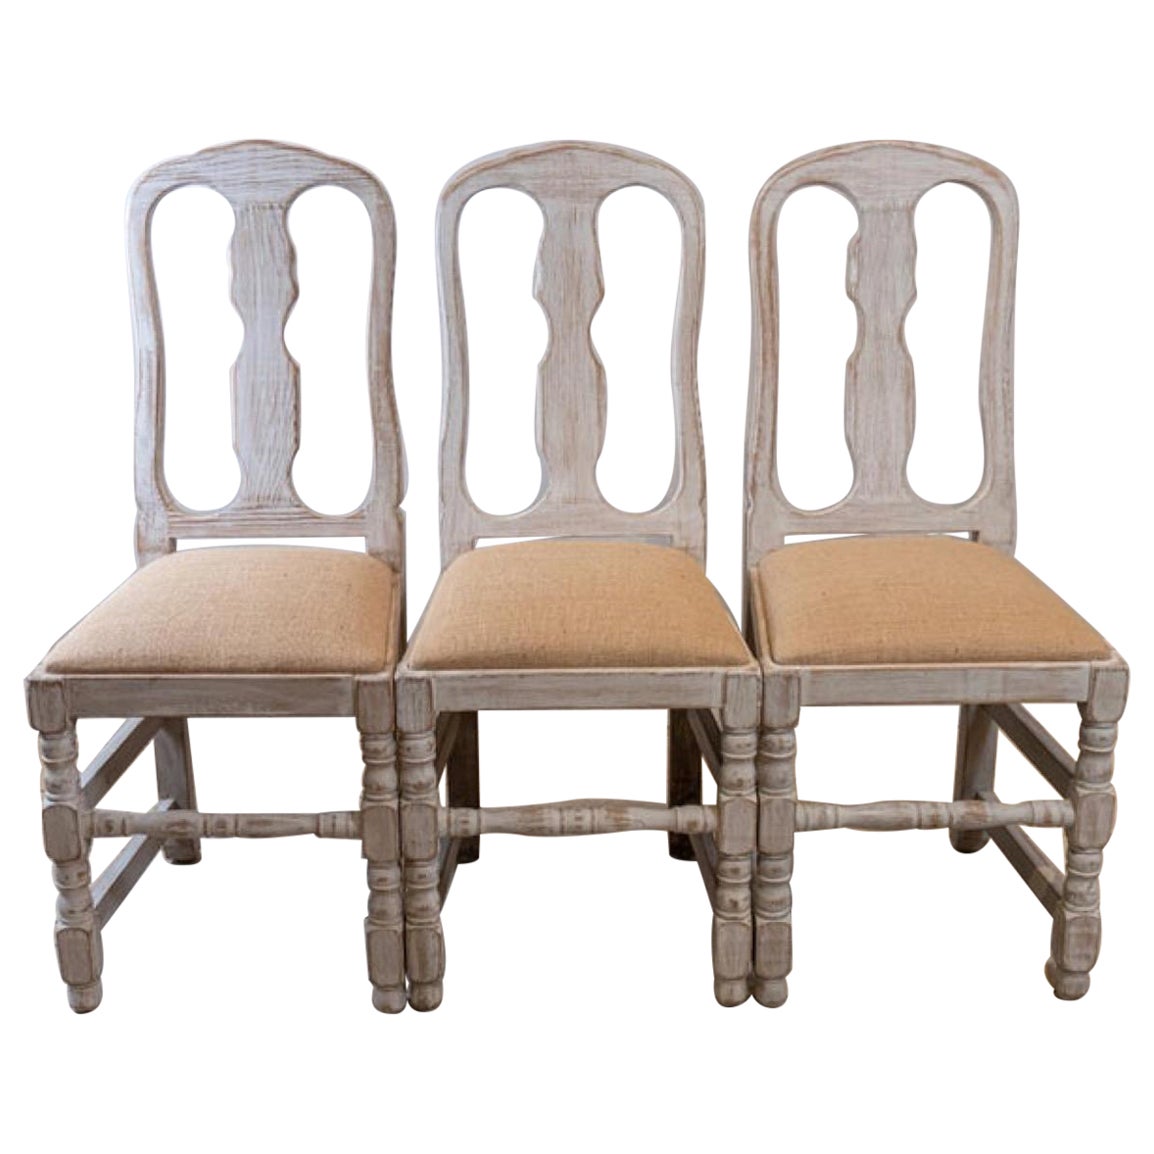 Set of 4 1940s Swedish Country Style High Backed White-Washed Folk Chairs